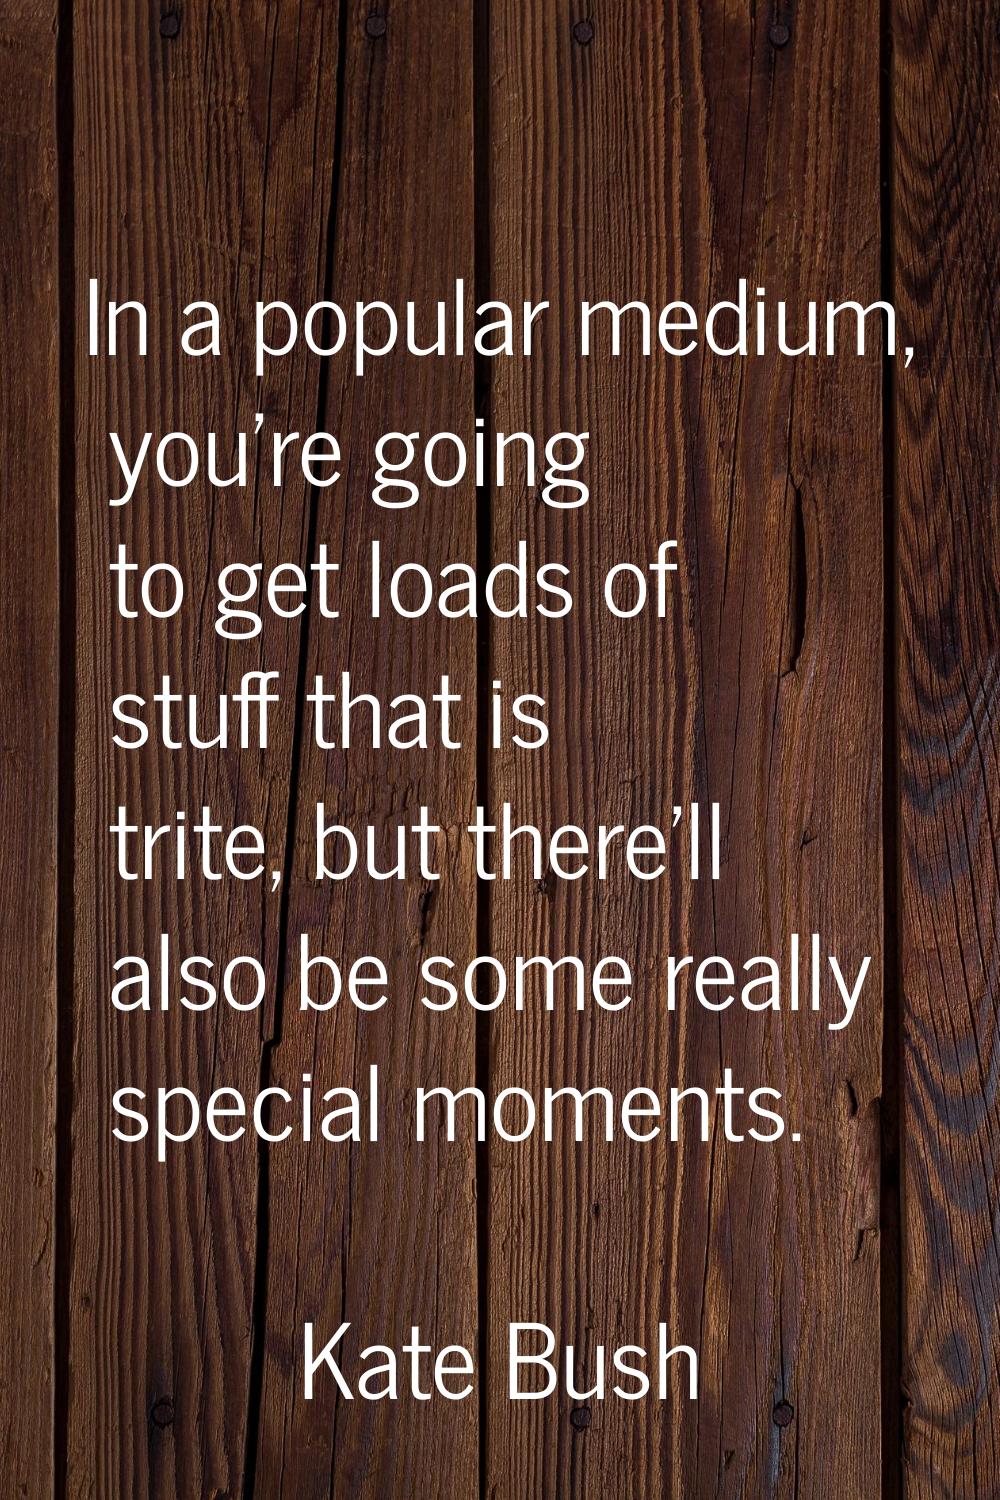 In a popular medium, you're going to get loads of stuff that is trite, but there'll also be some re